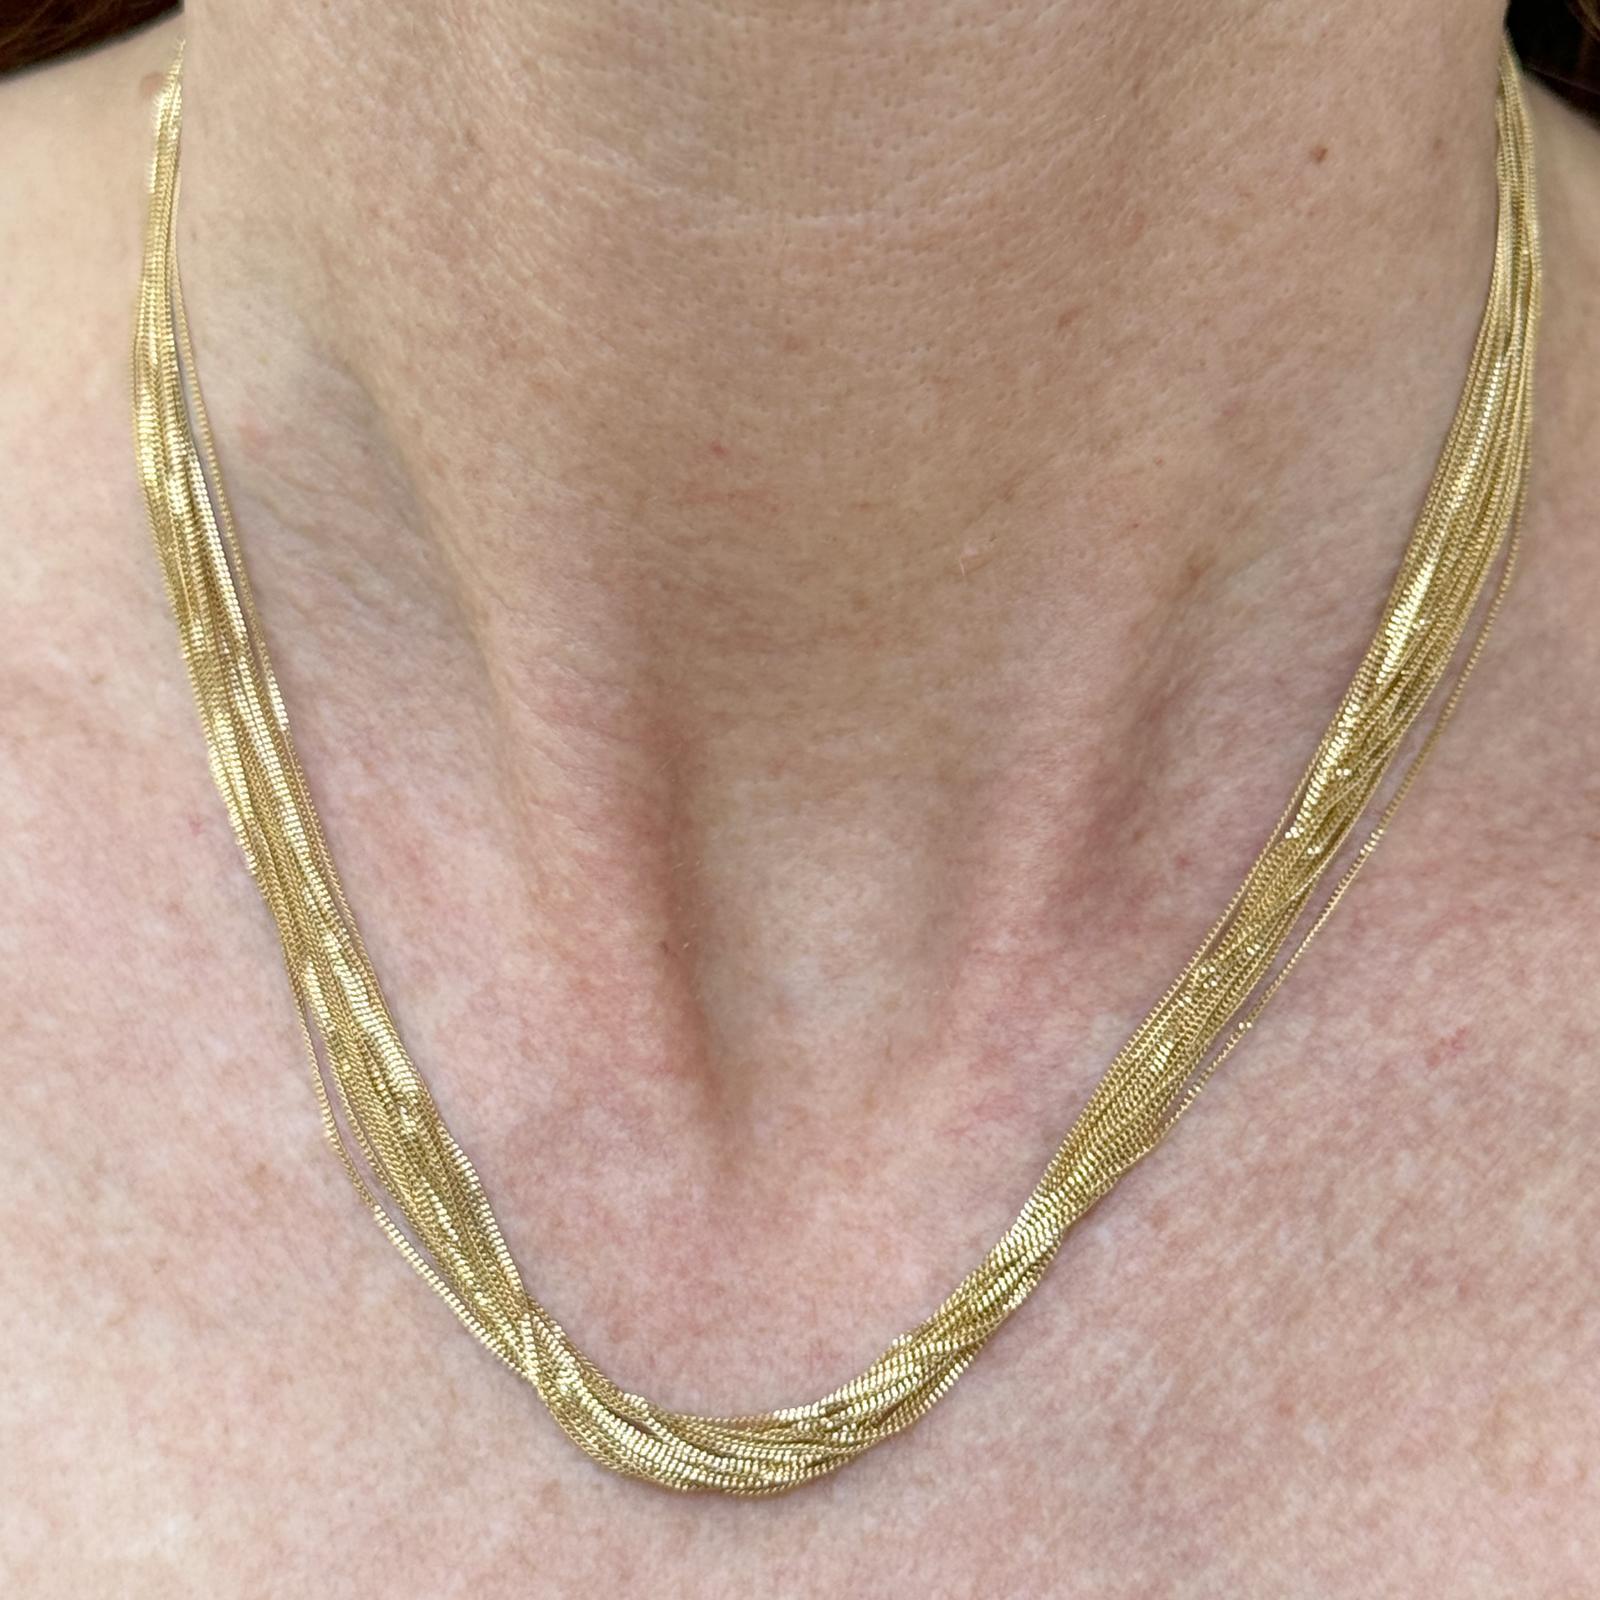 Italian multi-strand necklace crafted in 18 karat yellow gold. The necklace features multiple link chains in a single necklace. The necklace measures 15.5 inches in length. Lobster clasp. Weight: 13.9 grams.